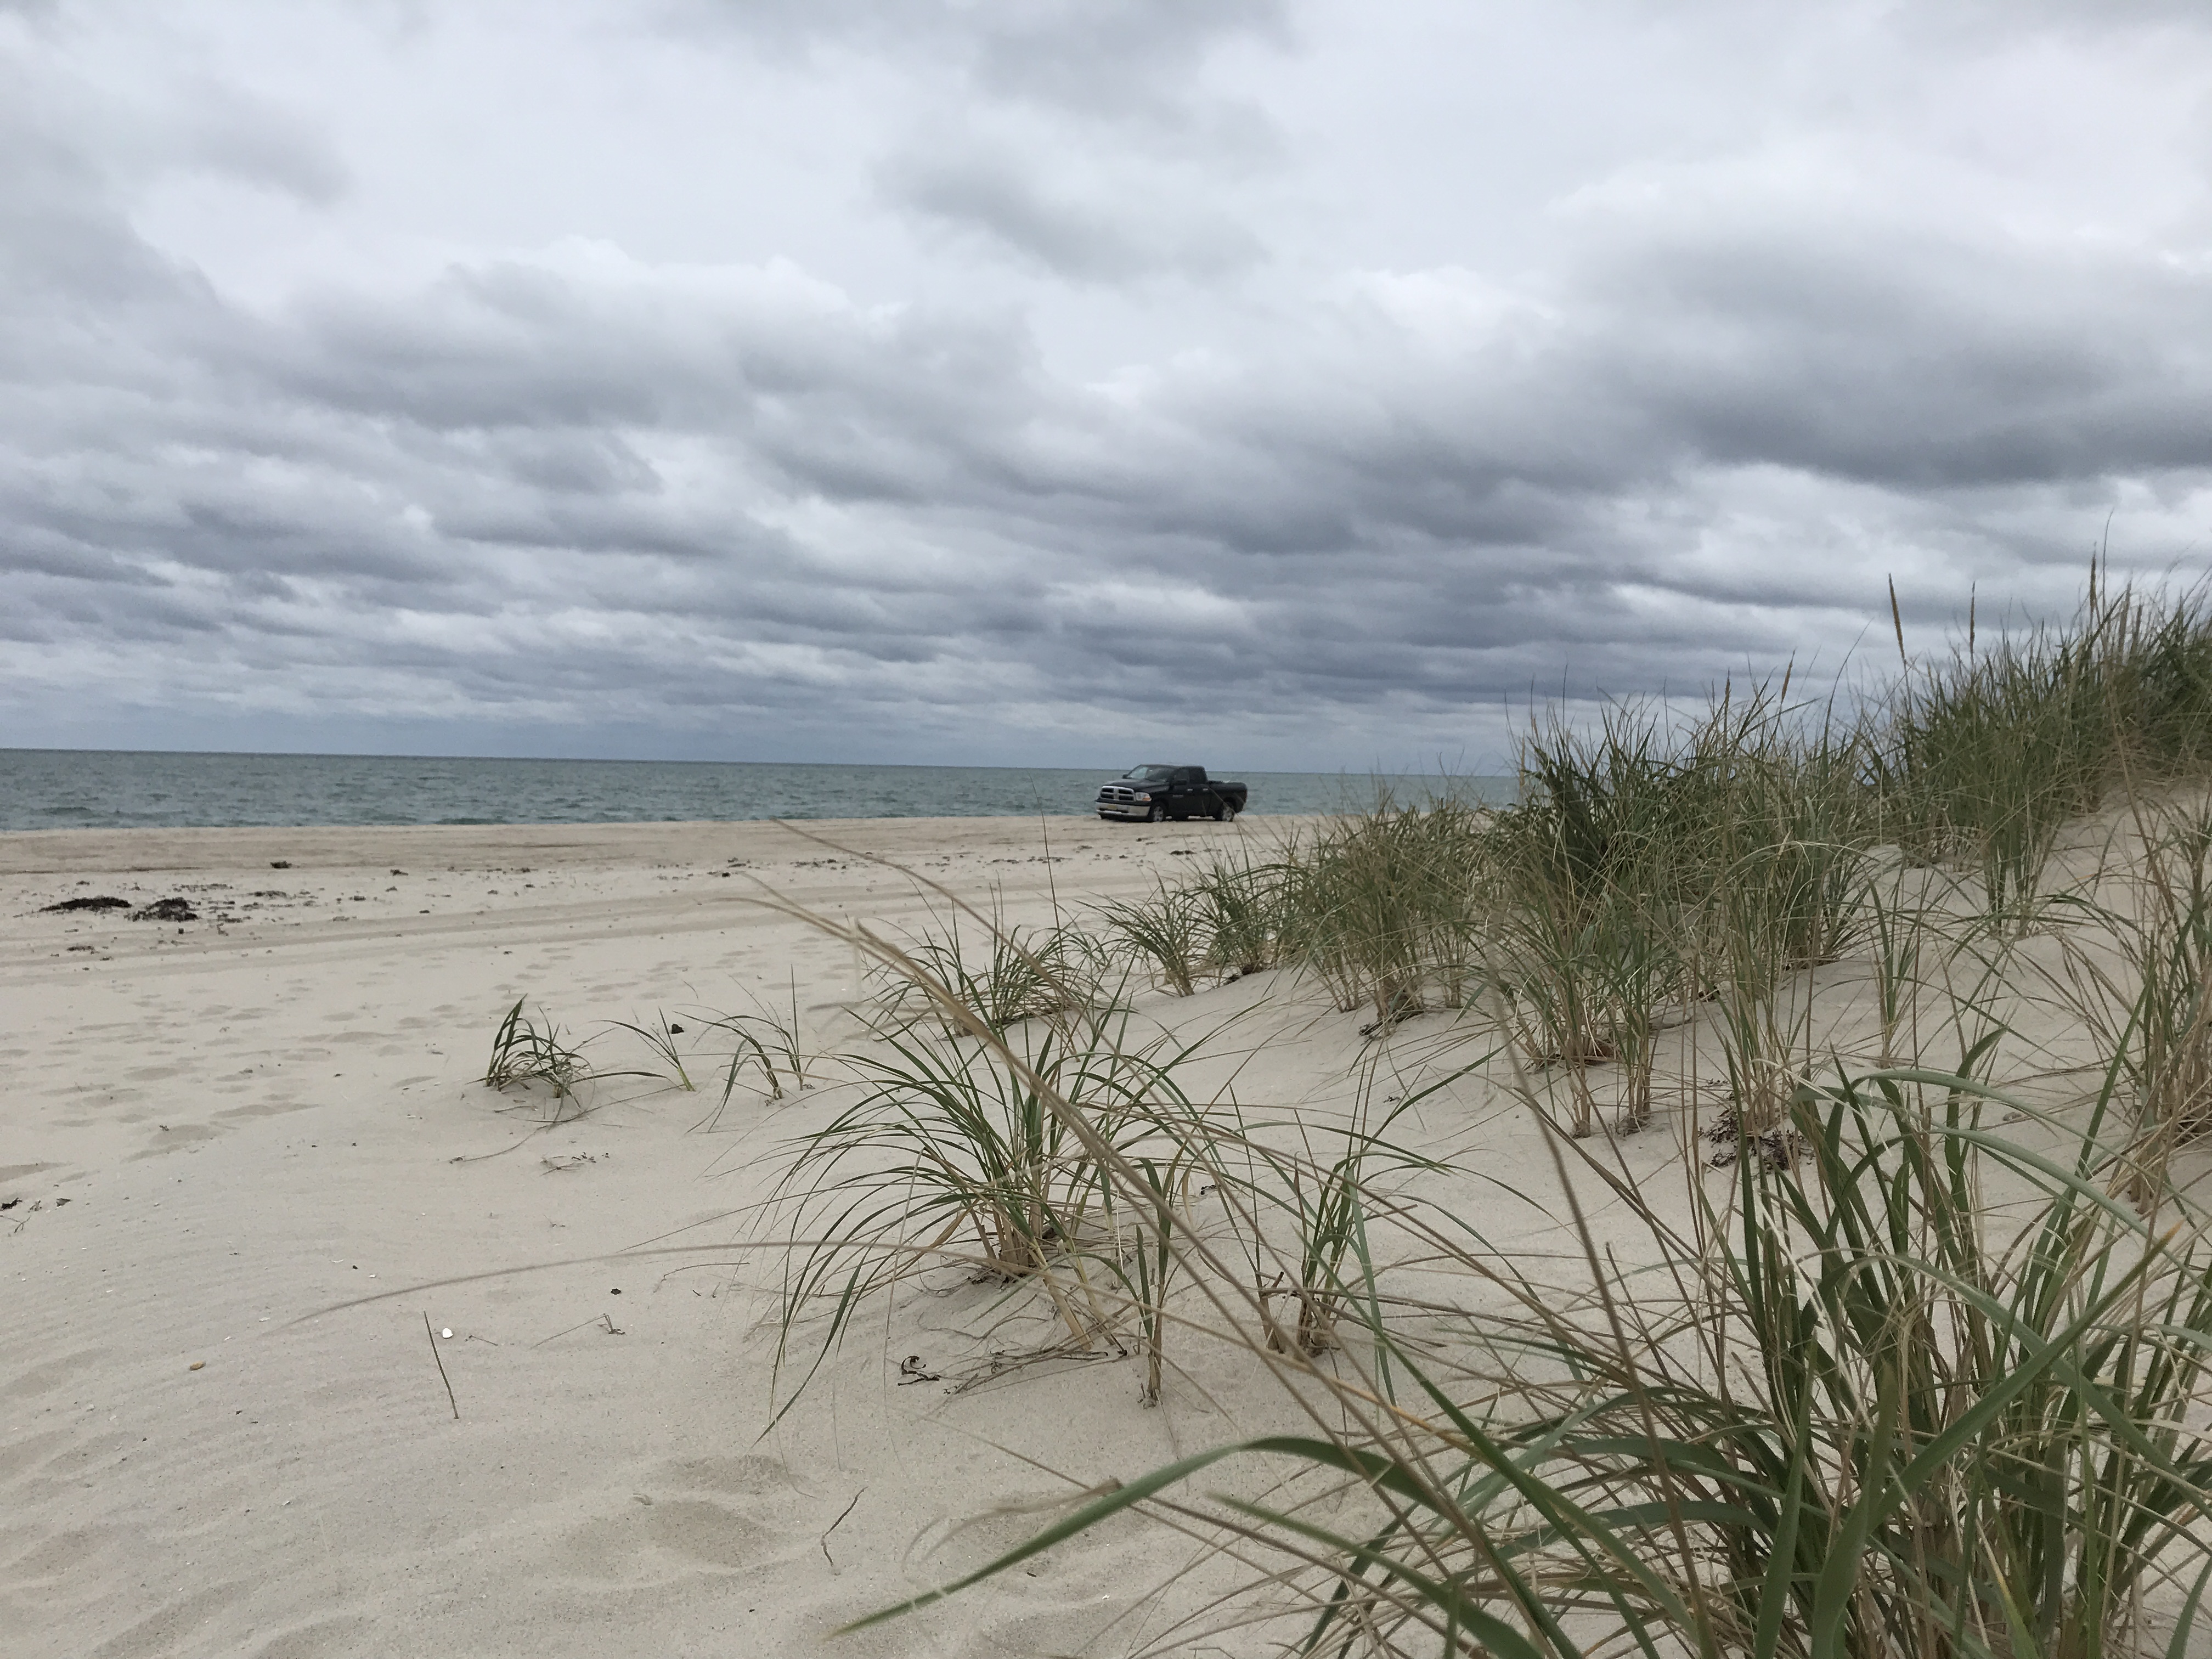 A cloudy beachfront in Lavallette, Oct. 26, 2018, as a nor'easter approaches. (Photo: Daniel Nee)